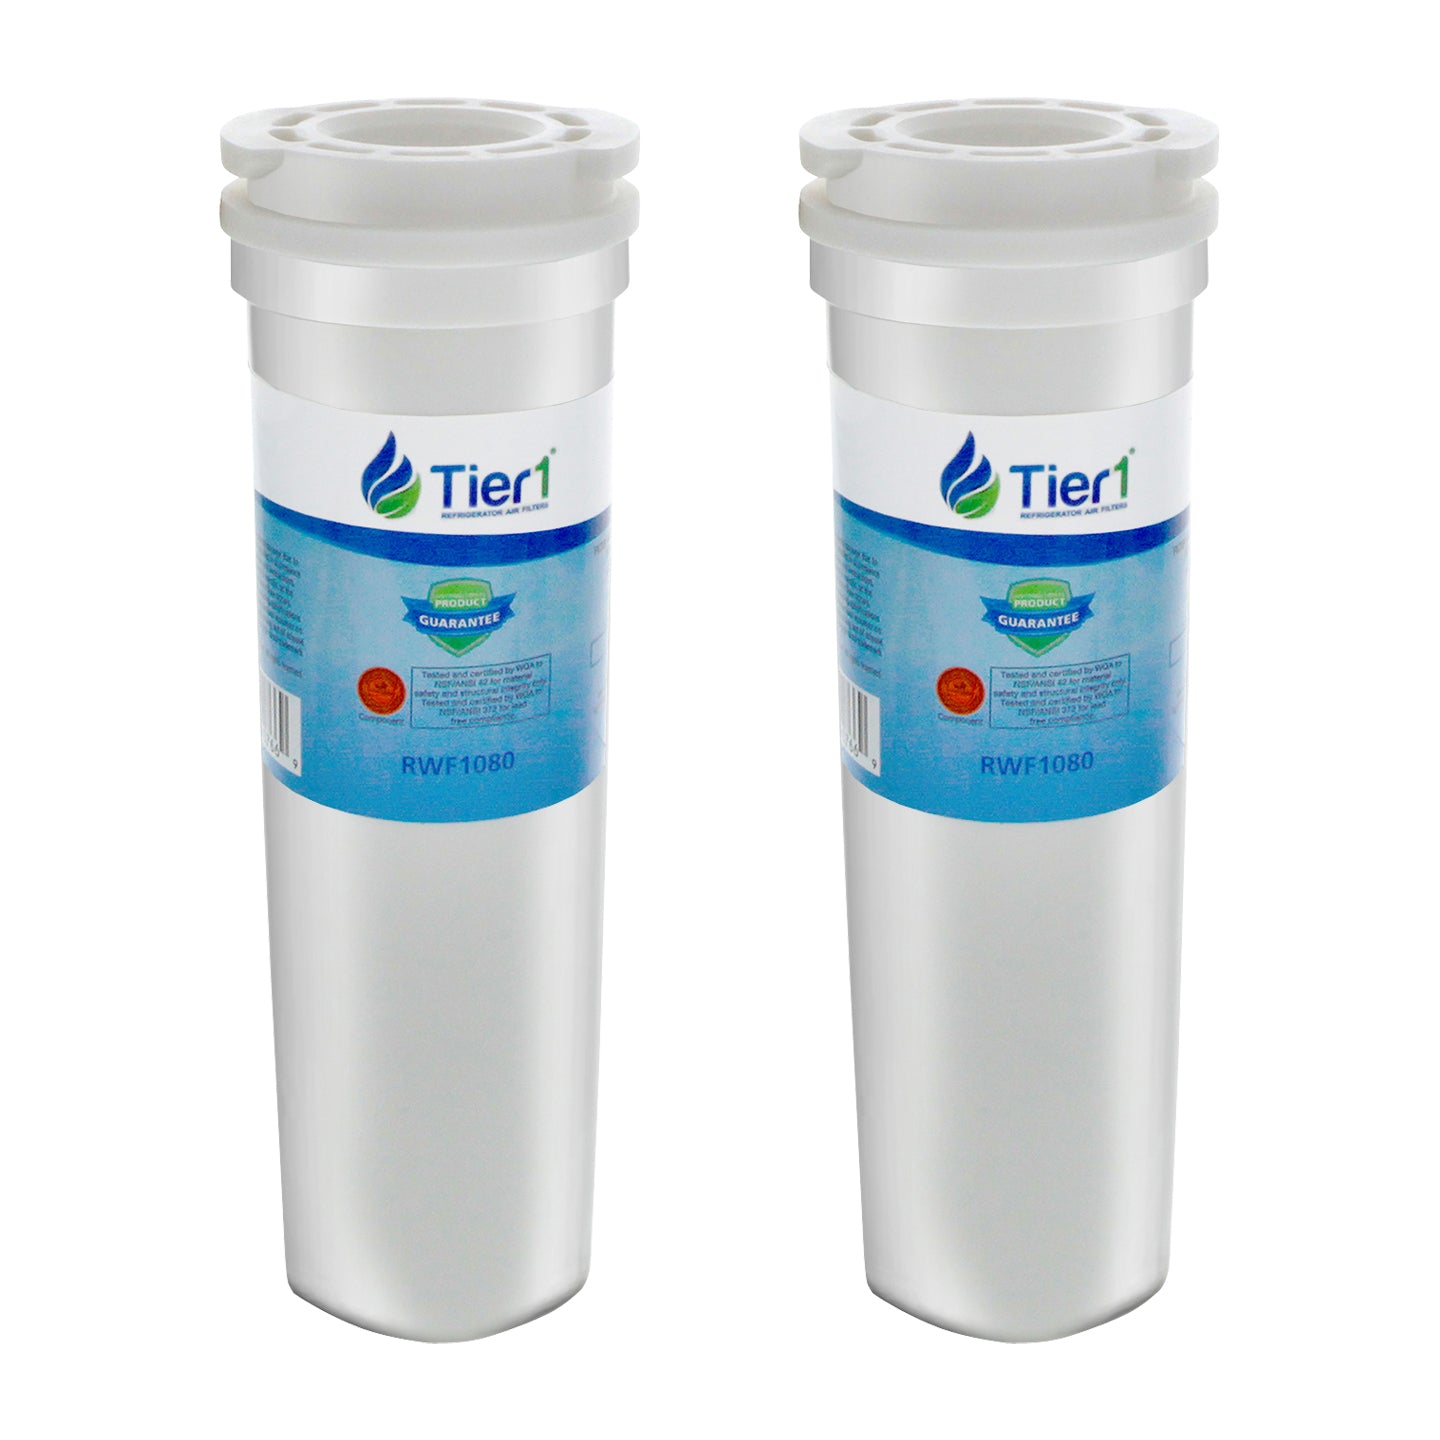 Tier1 Fisher & Paykel 836848 Refrigerator Water Filter Replacement Comparable